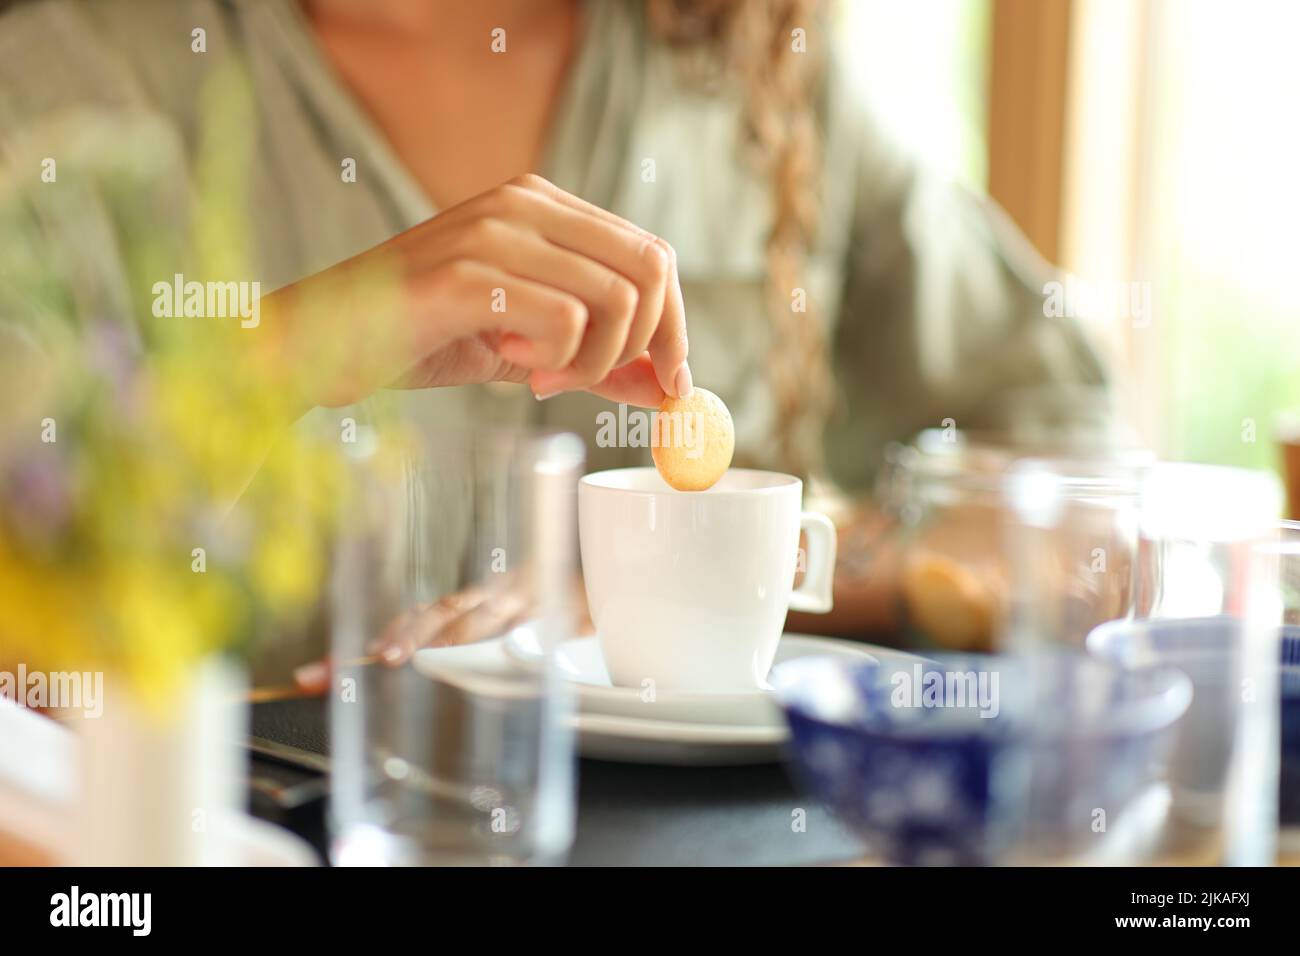 Close up portrait of a woman hand dipping cookie in milk in a restaurant Stock Photo